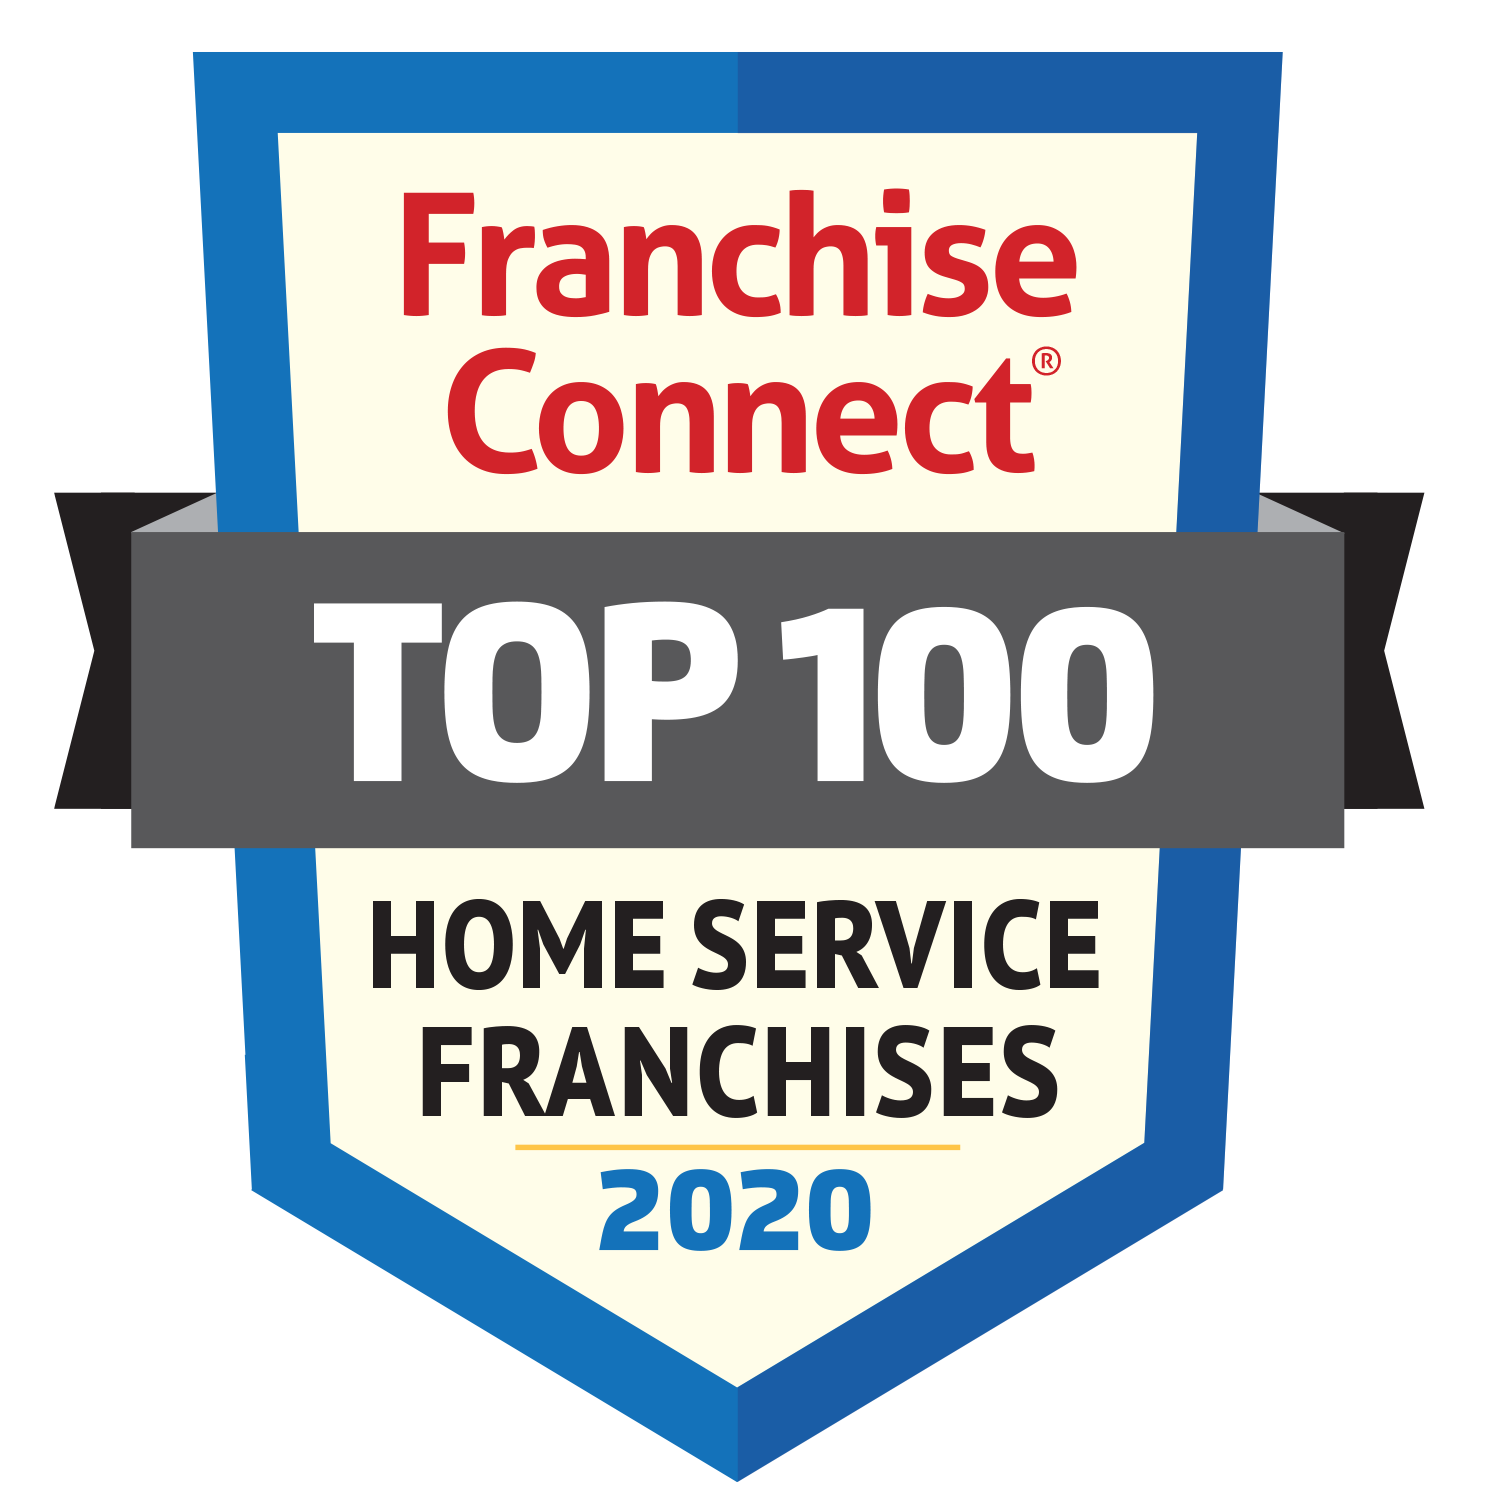 Franchise connect top 100 home services 2020